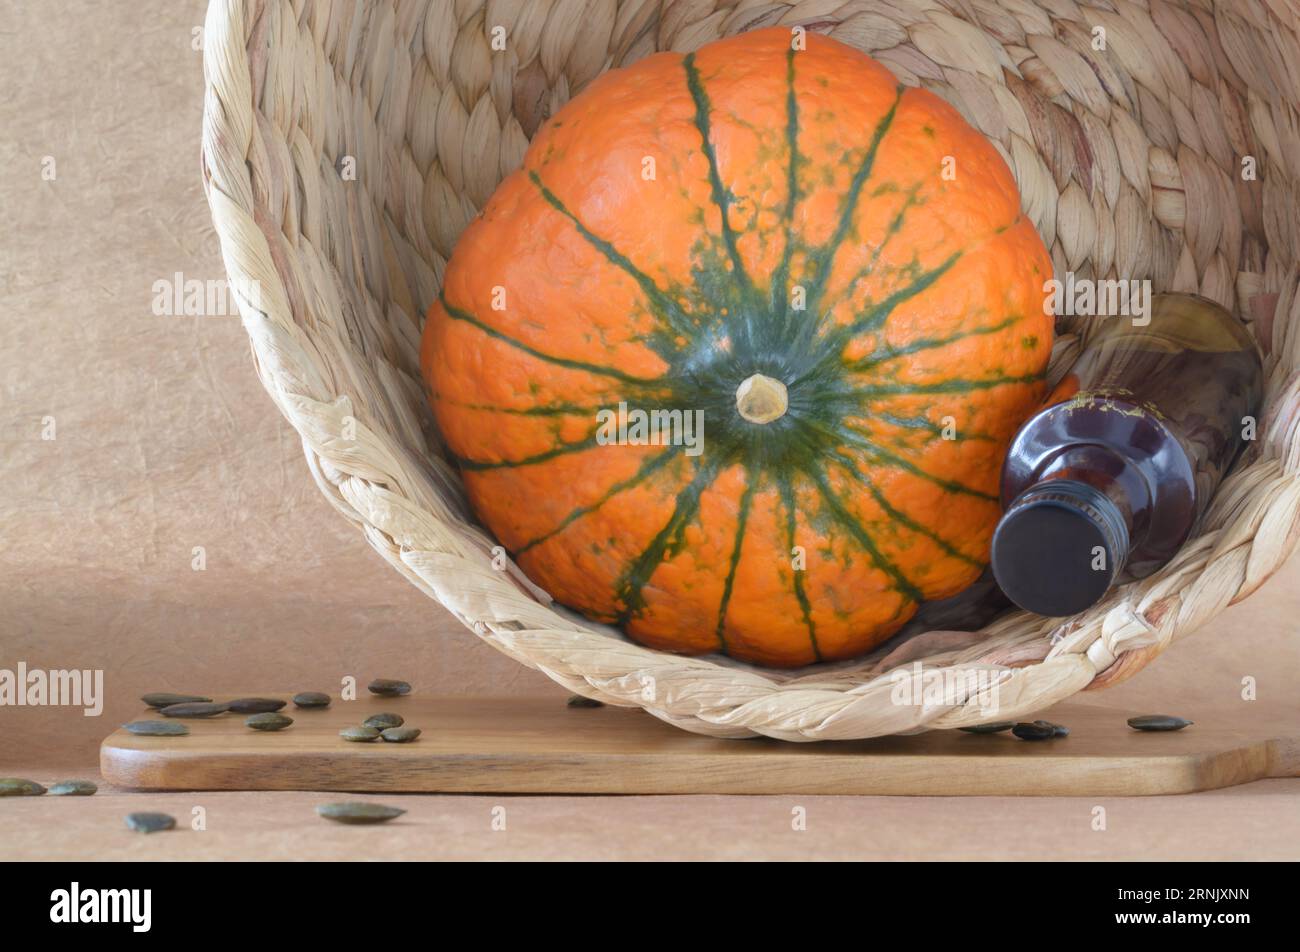 Still life with an orange round gourd, a bottle of gourd oil in a wicker basket in a horizontal format Stock Photo